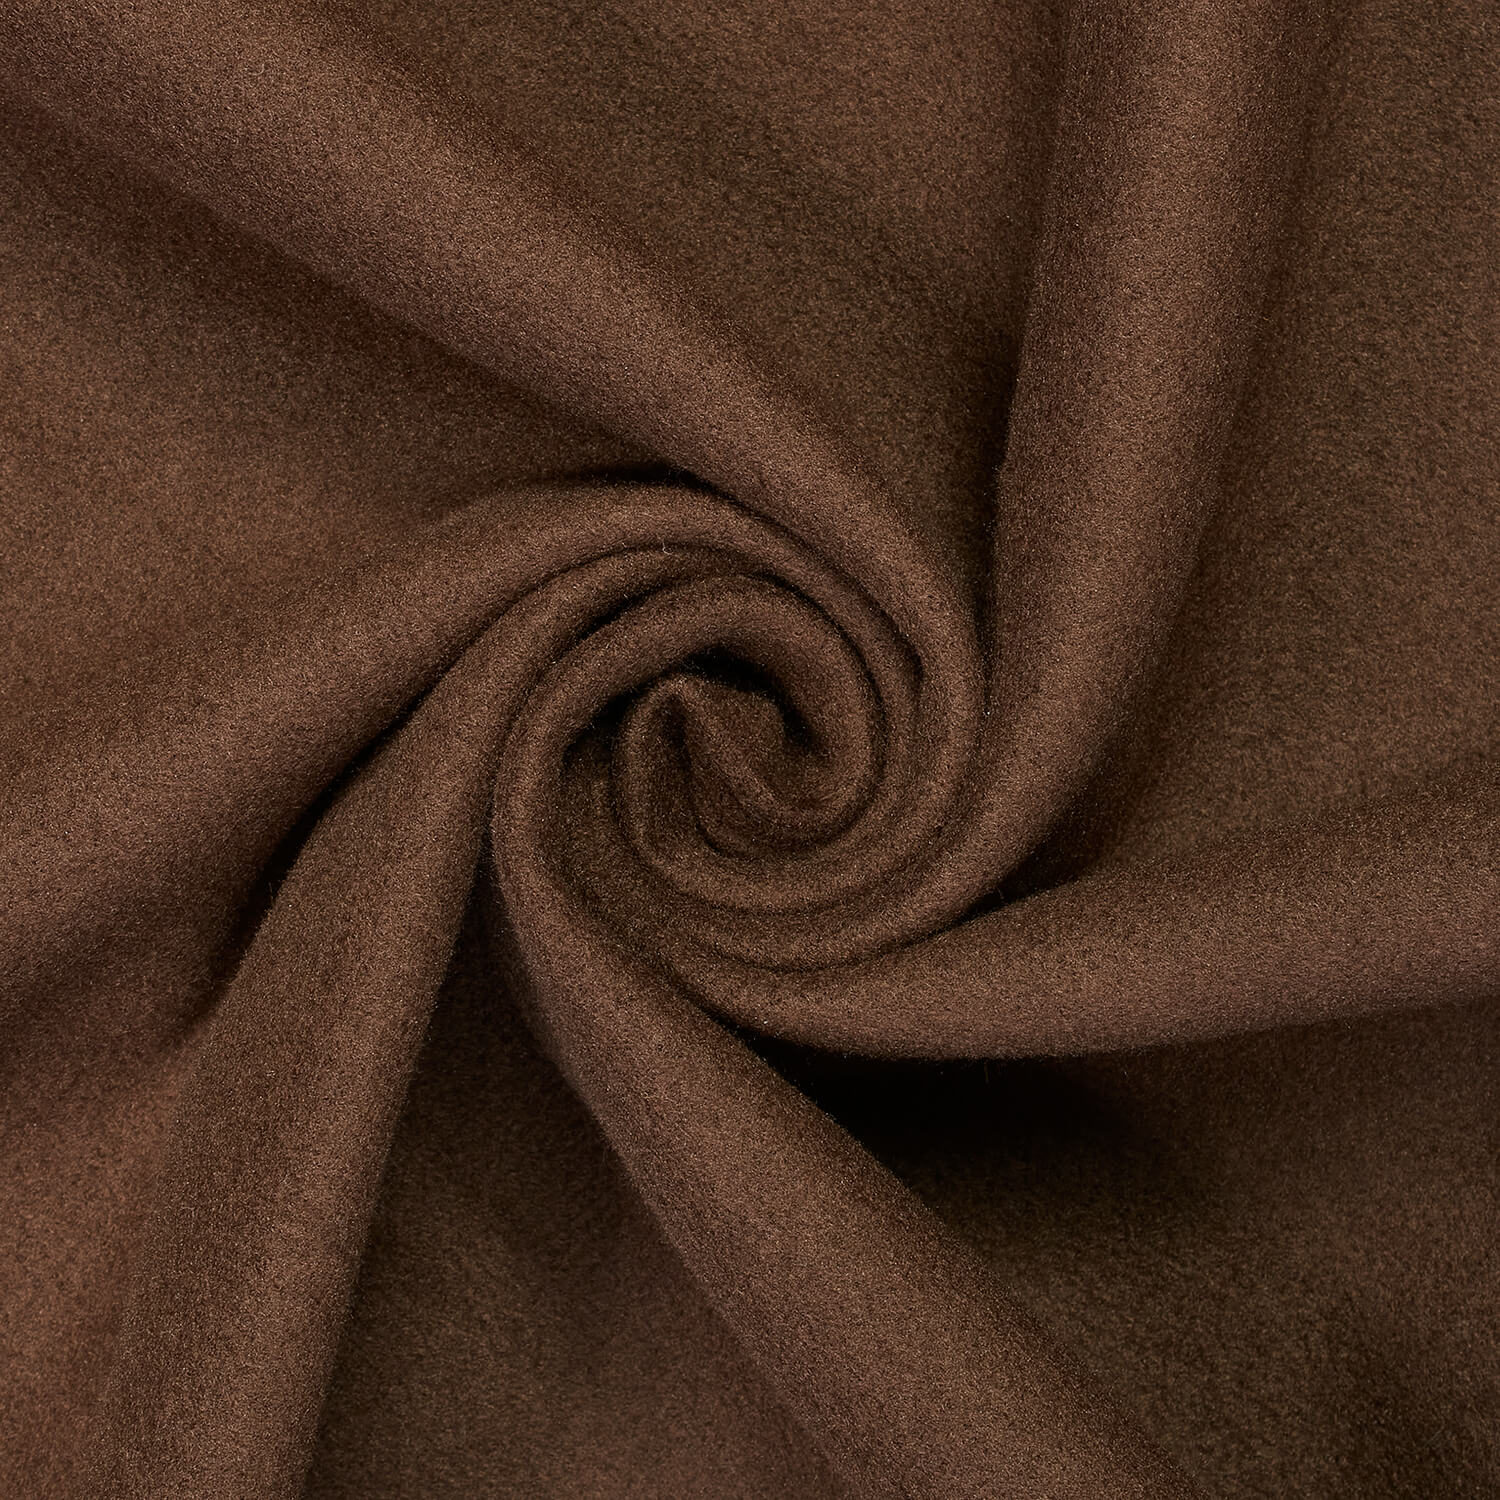 Polyester Wool Fabric Brushed Coating 59 inches Wide Soft By The Yard  Medium Heavy Weight (Brown)